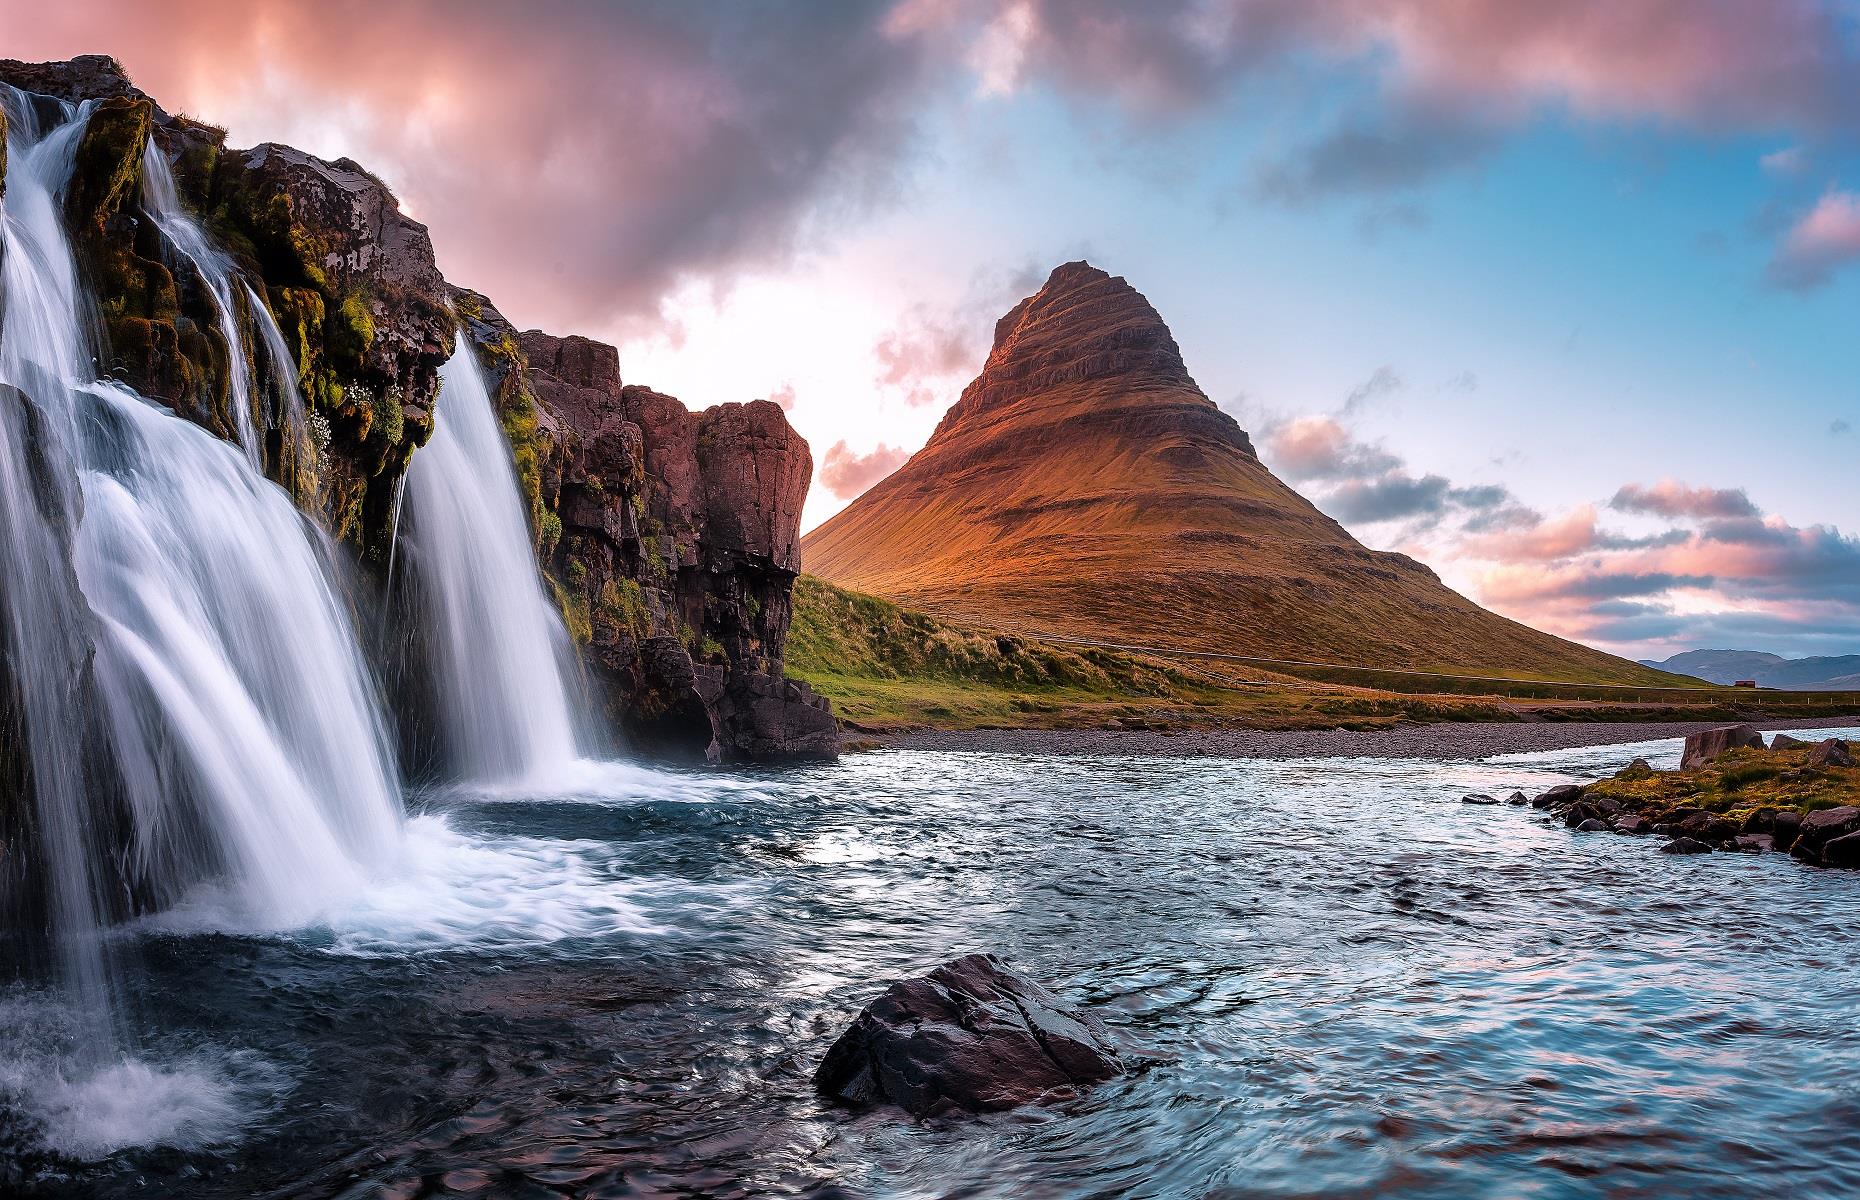 <p>Though not as famous as Mount Everest or Kilimanjaro, Kirkjufell is up there with the world's most breathtaking mountains. The 1,519-foot (463m) peak can be found in the Snæfellsnes peninsula, on the island's western coastline, an area defined by glistening fjords, geothermal pools and dramatic waterfalls. Made famous as Arrowhead Mountain in <em>Game of Thrones</em>, Kirkjufell is now the most photographed peak in all of Iceland and it's easy to understand why.</p>  <p><a href="https://www.loveexploring.com/galleries/95883/secrets-of-the-worlds-most-beautiful-mountains?page=1"><strong>Find out the secrets of the world's most beautiful mountains</strong></a></p>